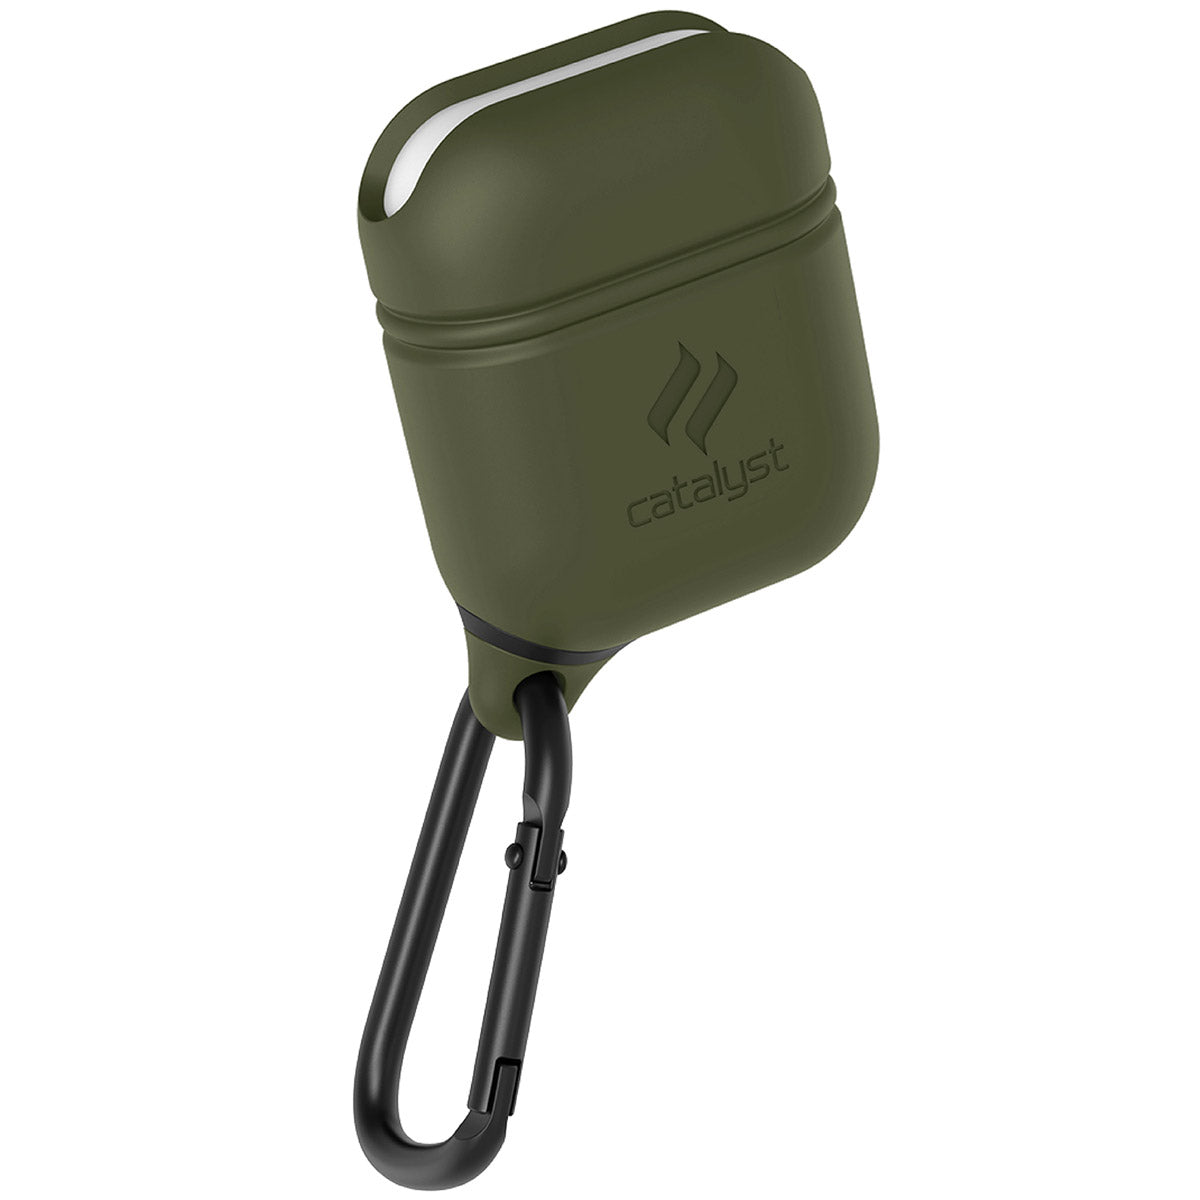 CATAPDGRN-FBA | Catalyst airpods gen2/1 waterproof case + carabiner showing the front view of the case in army green colorway